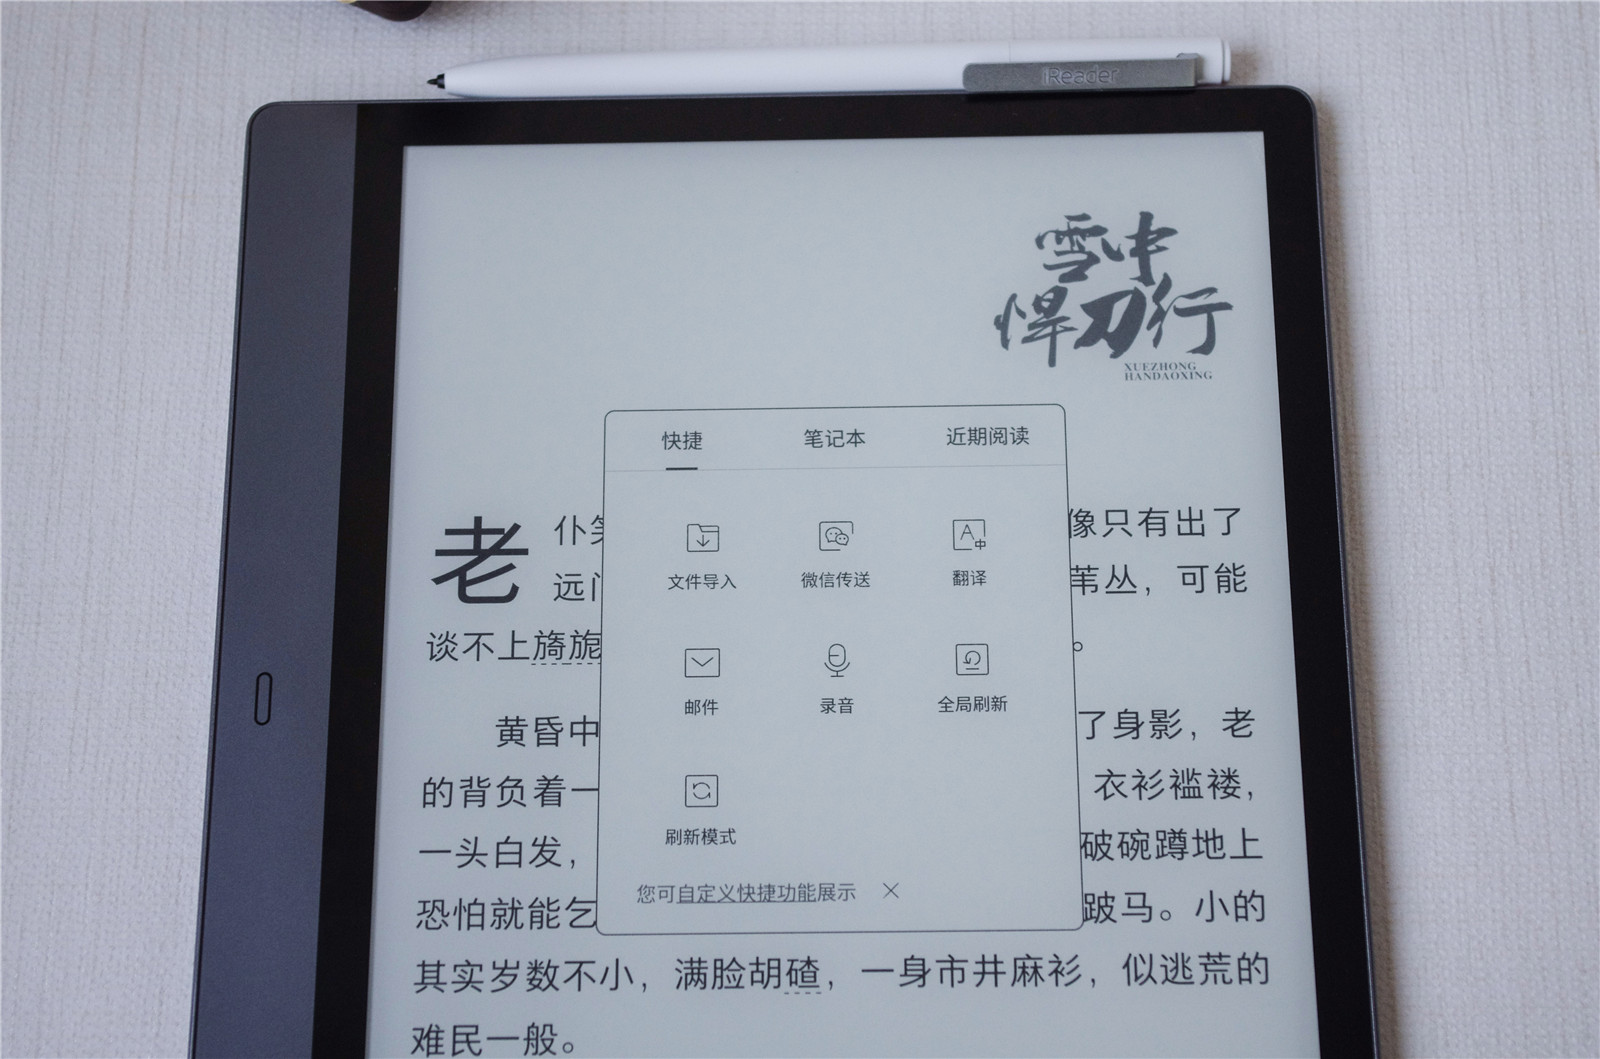 1999 yuan iReader Smart 2 experience: unmatched at the same price